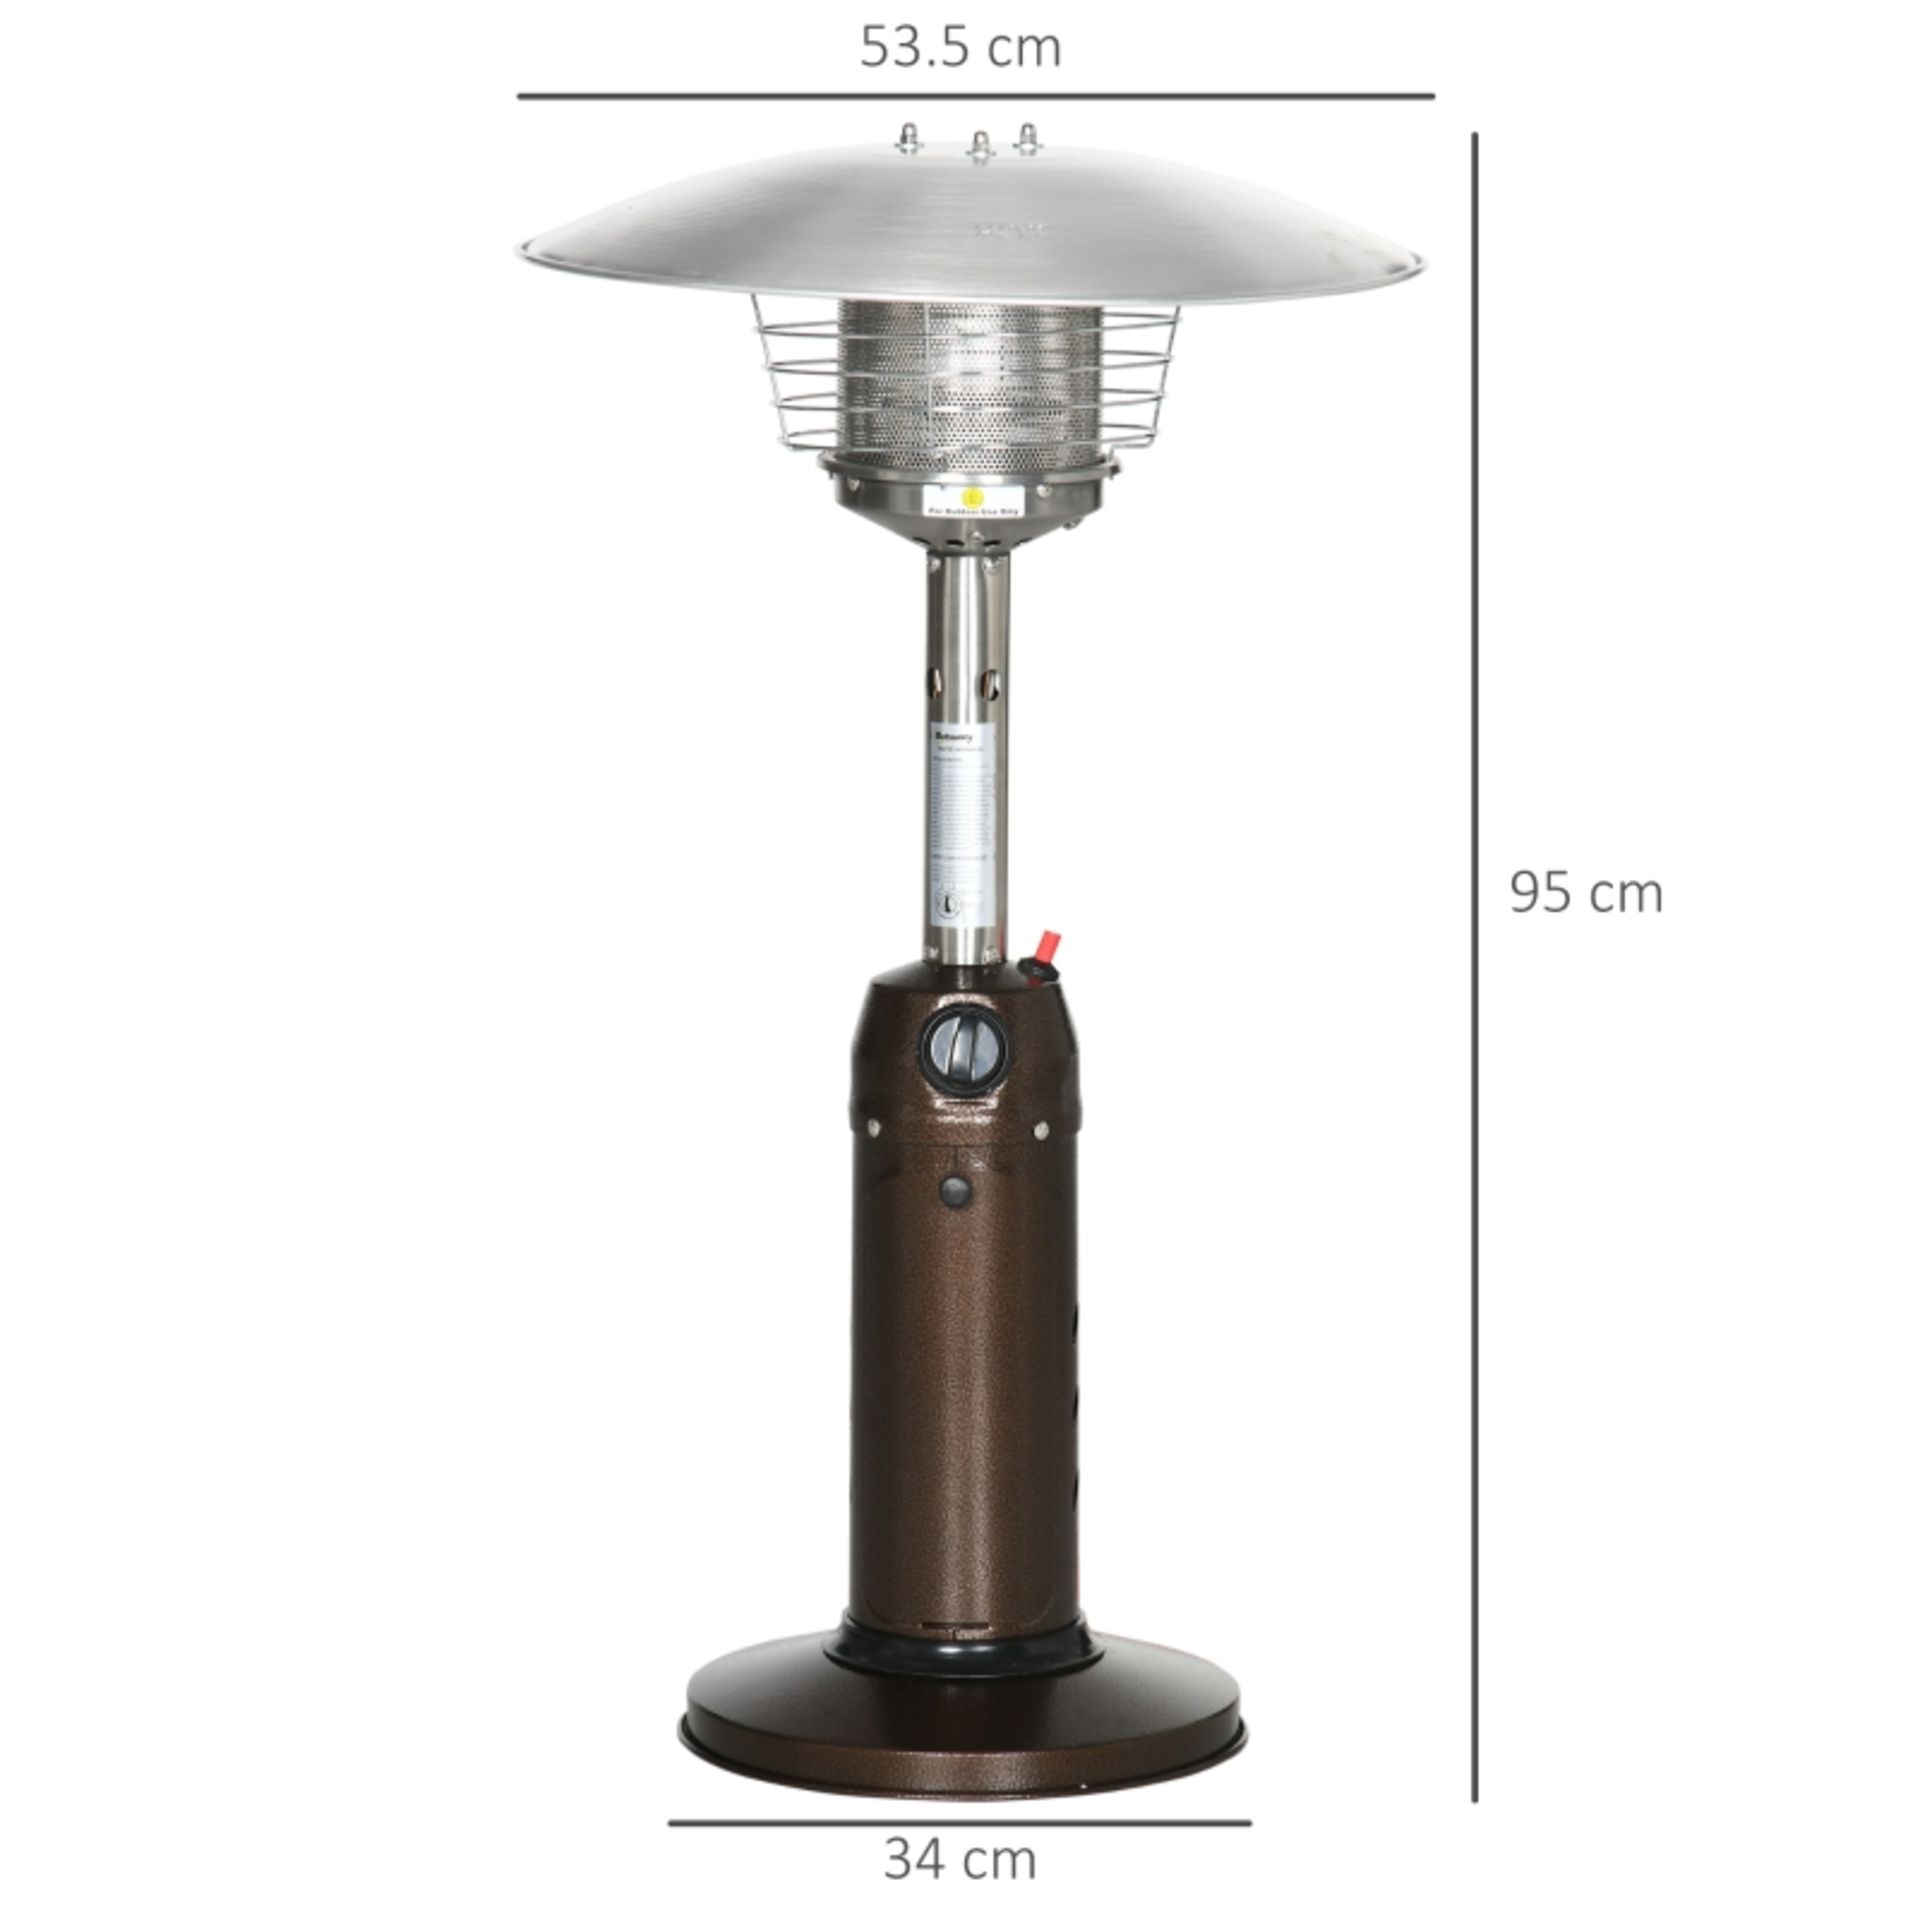 RPP £129.99 -Outsunny Gas Patio Heater with Tip-over Protection, Outdoor Heater with Piezo Ignition, - Image 3 of 4